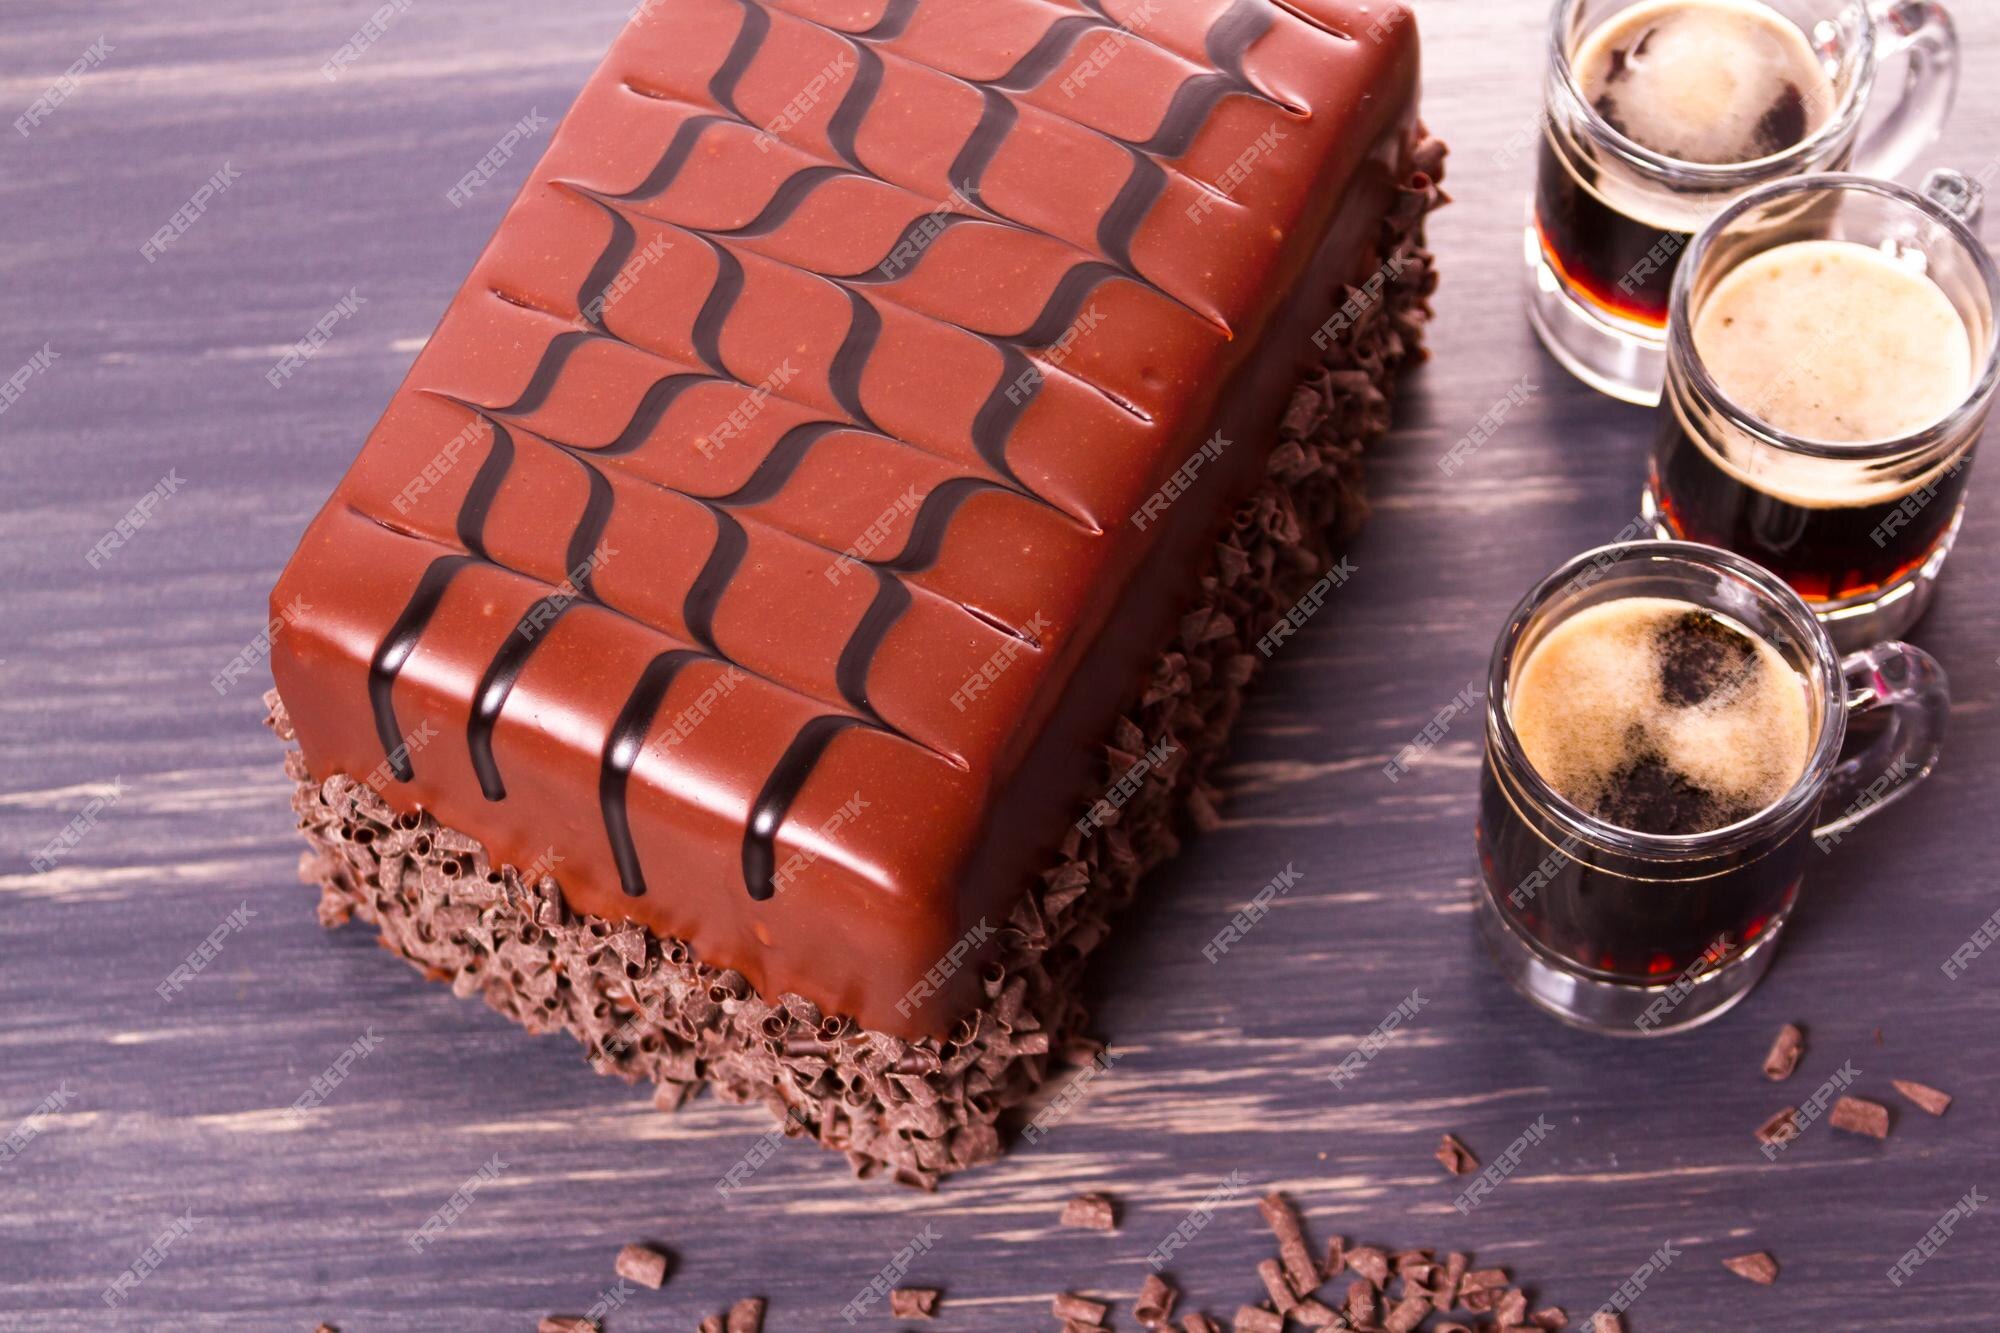 Premium Photo | Lefthand brewery milk stout cake with multiple layers of  stout-infused chocolate cake, filled with stout chocolate mousse and  covered in milk chocolate ganache.